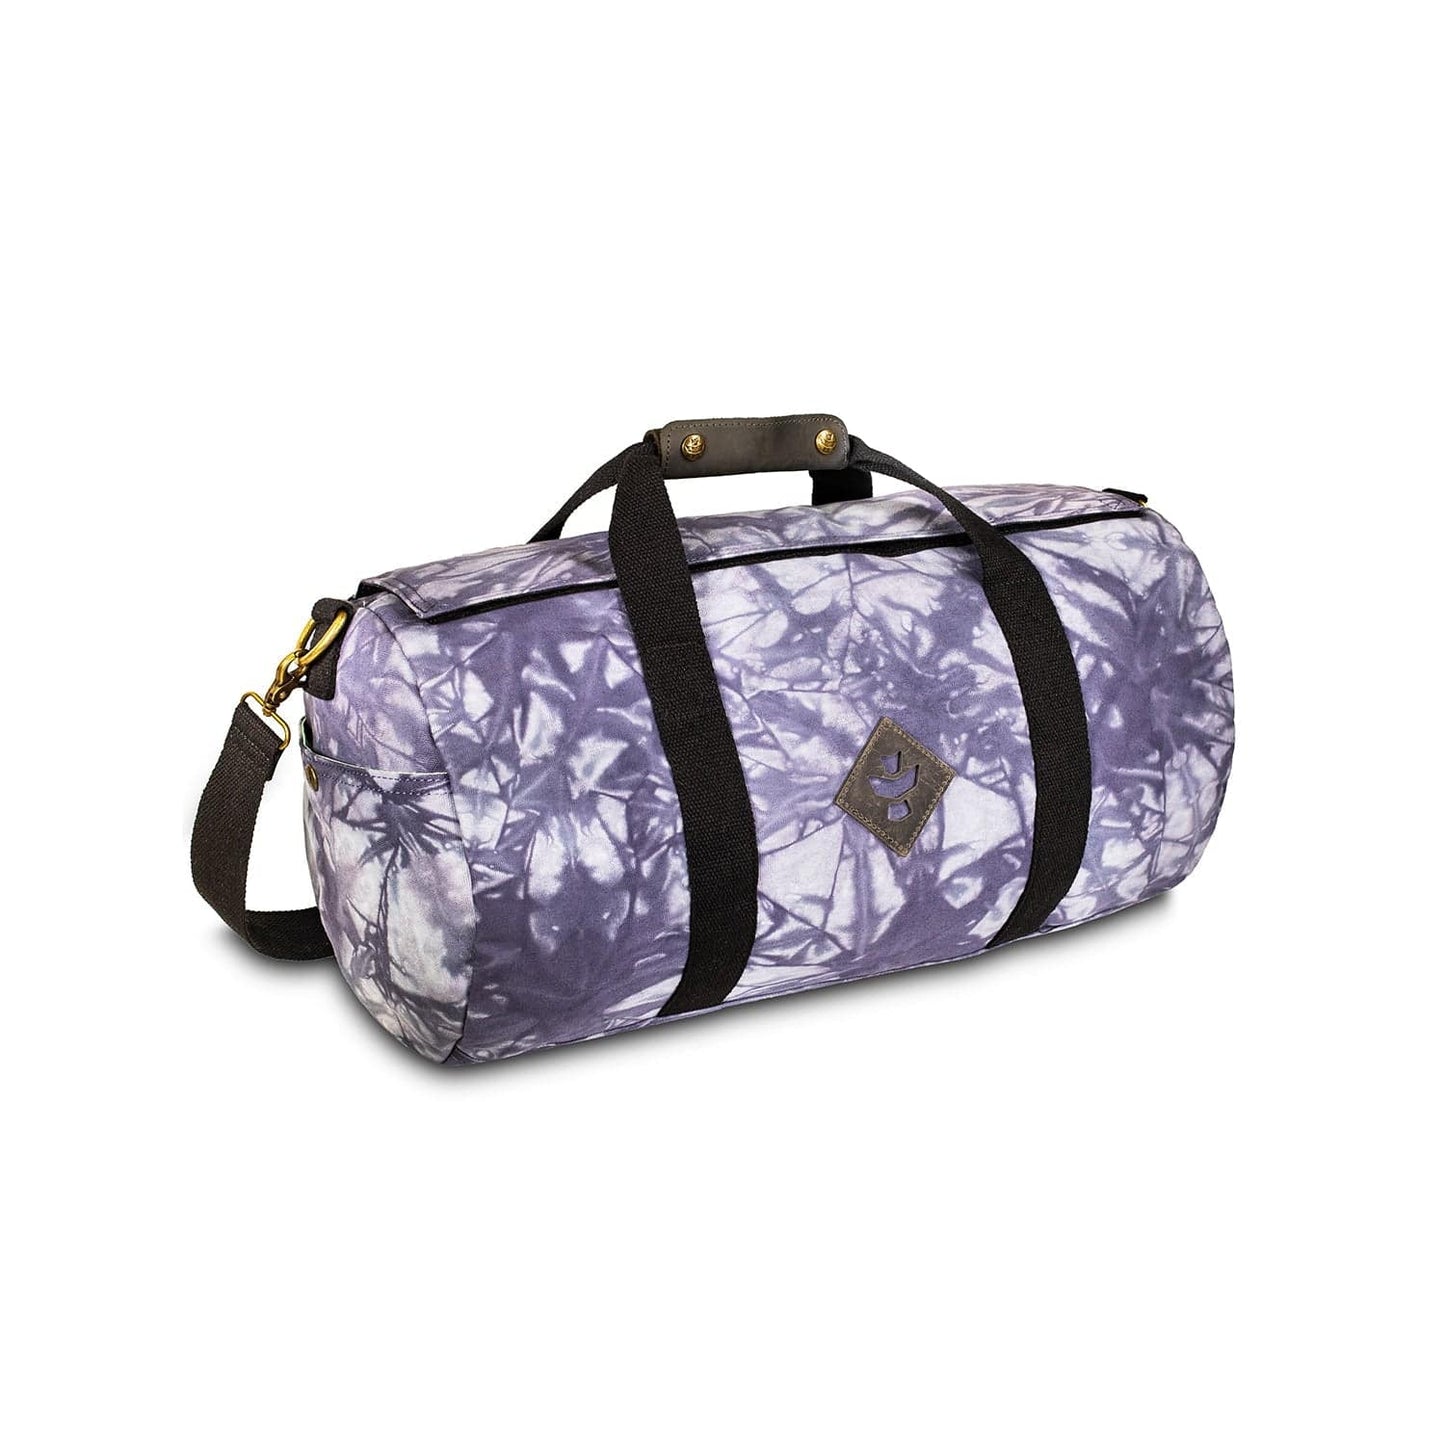 Revelry Supply Travel Bag Tie Dye The Overnighter - Smell Proof Small Duffle